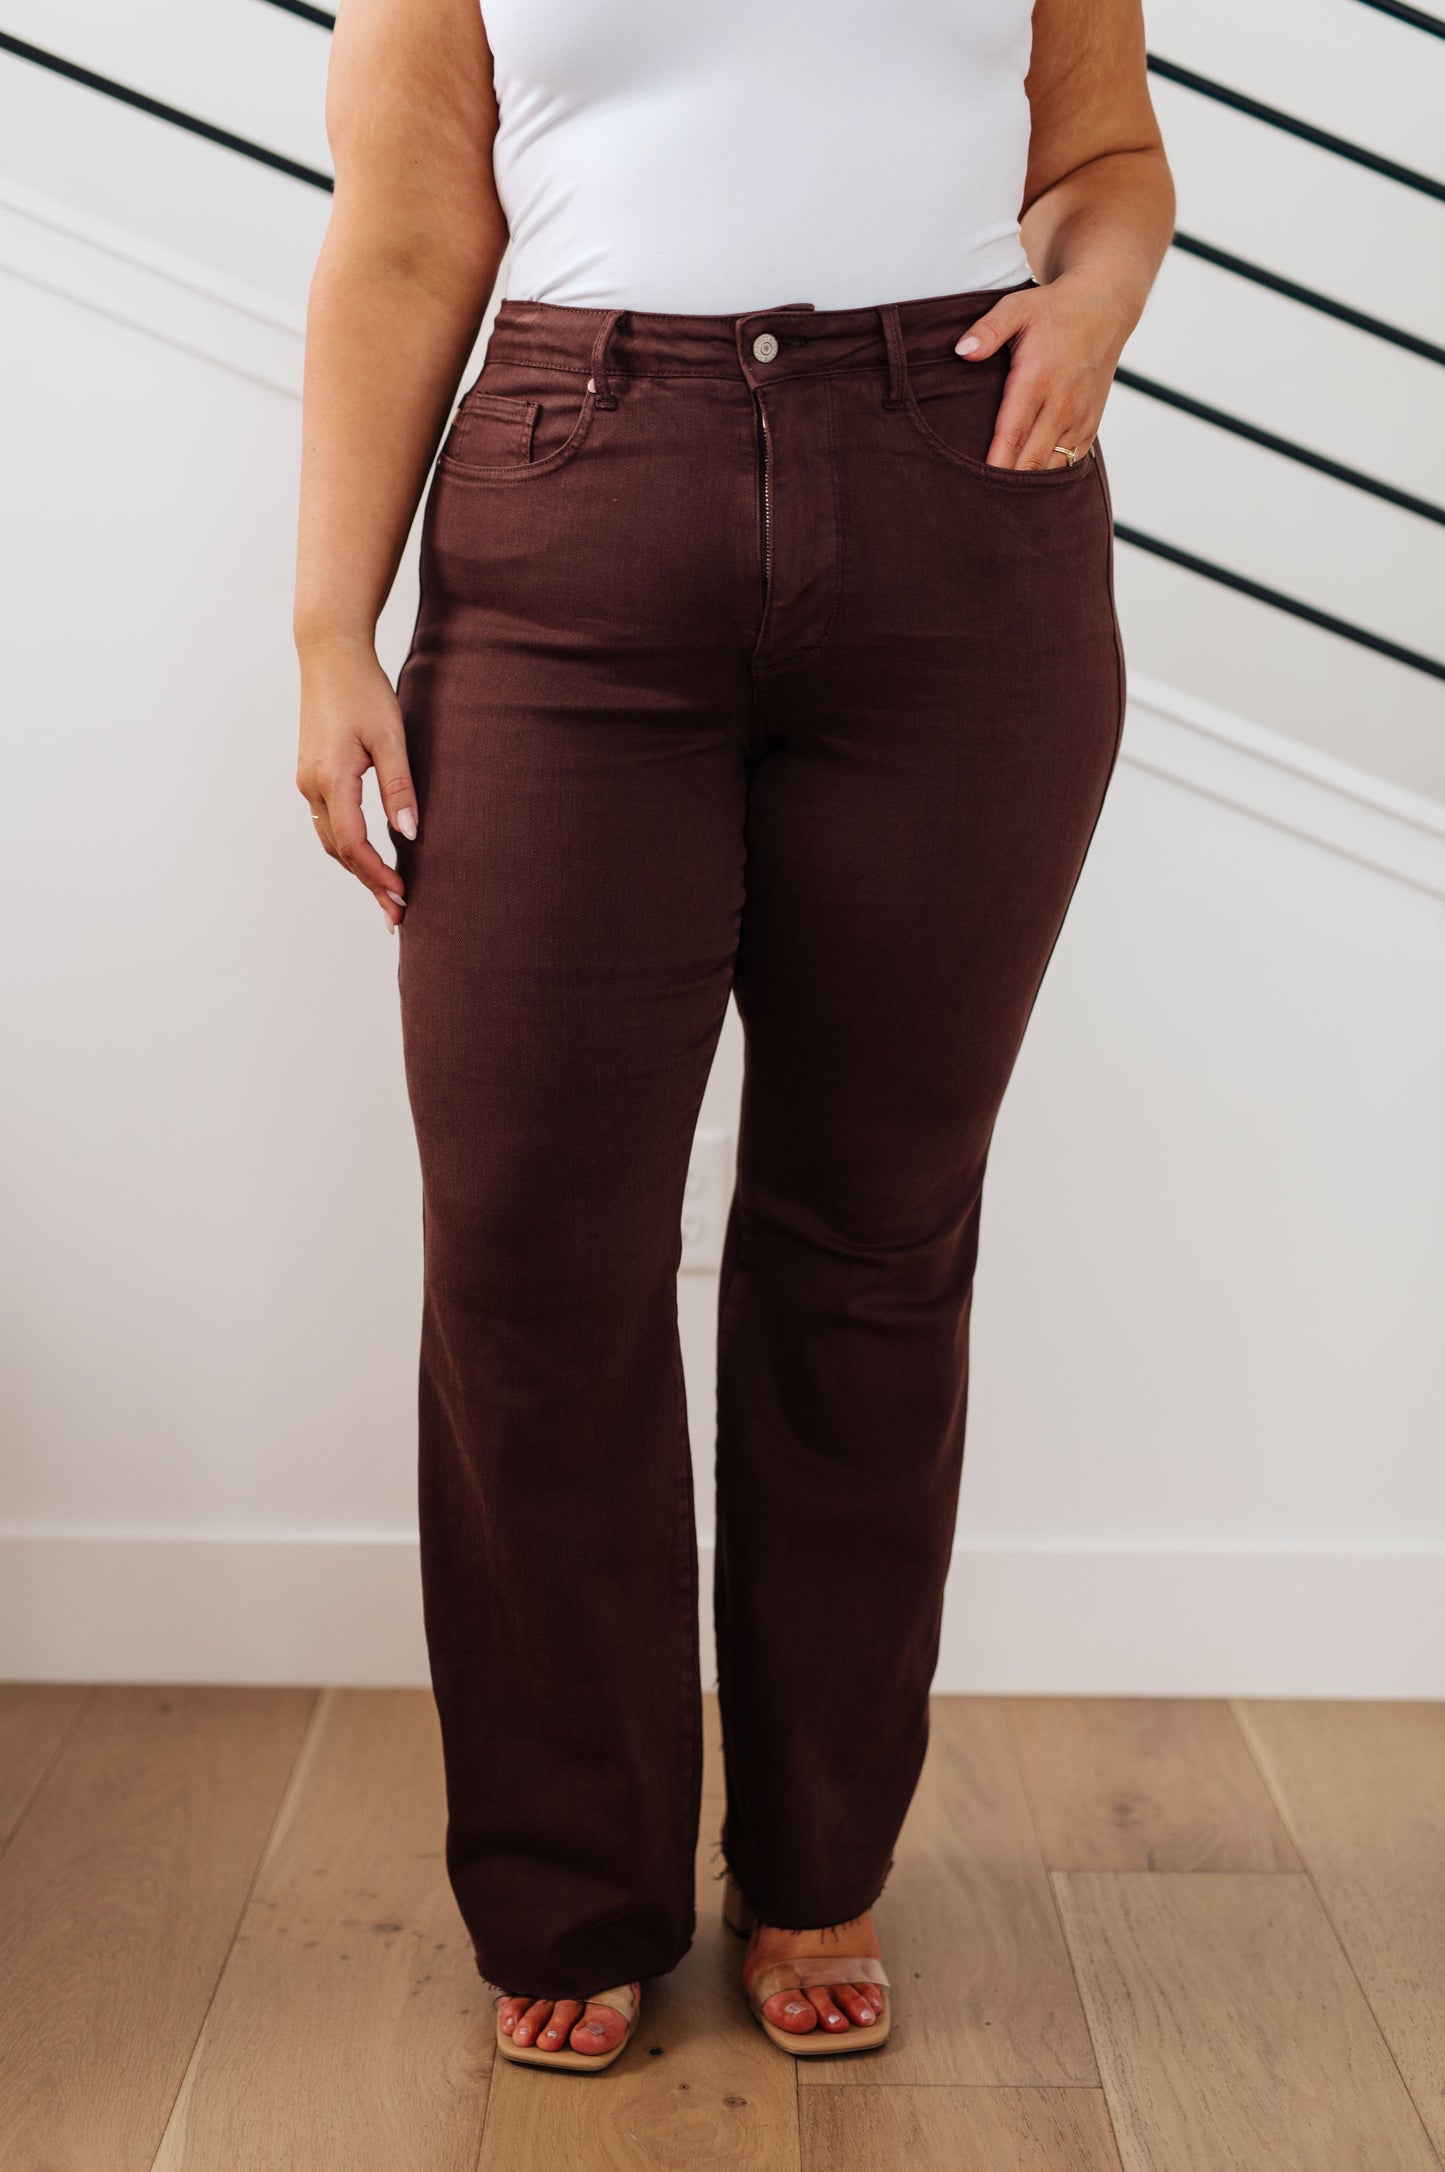 Judy Blue High Rise Control Top Flare Jeans in Espresso